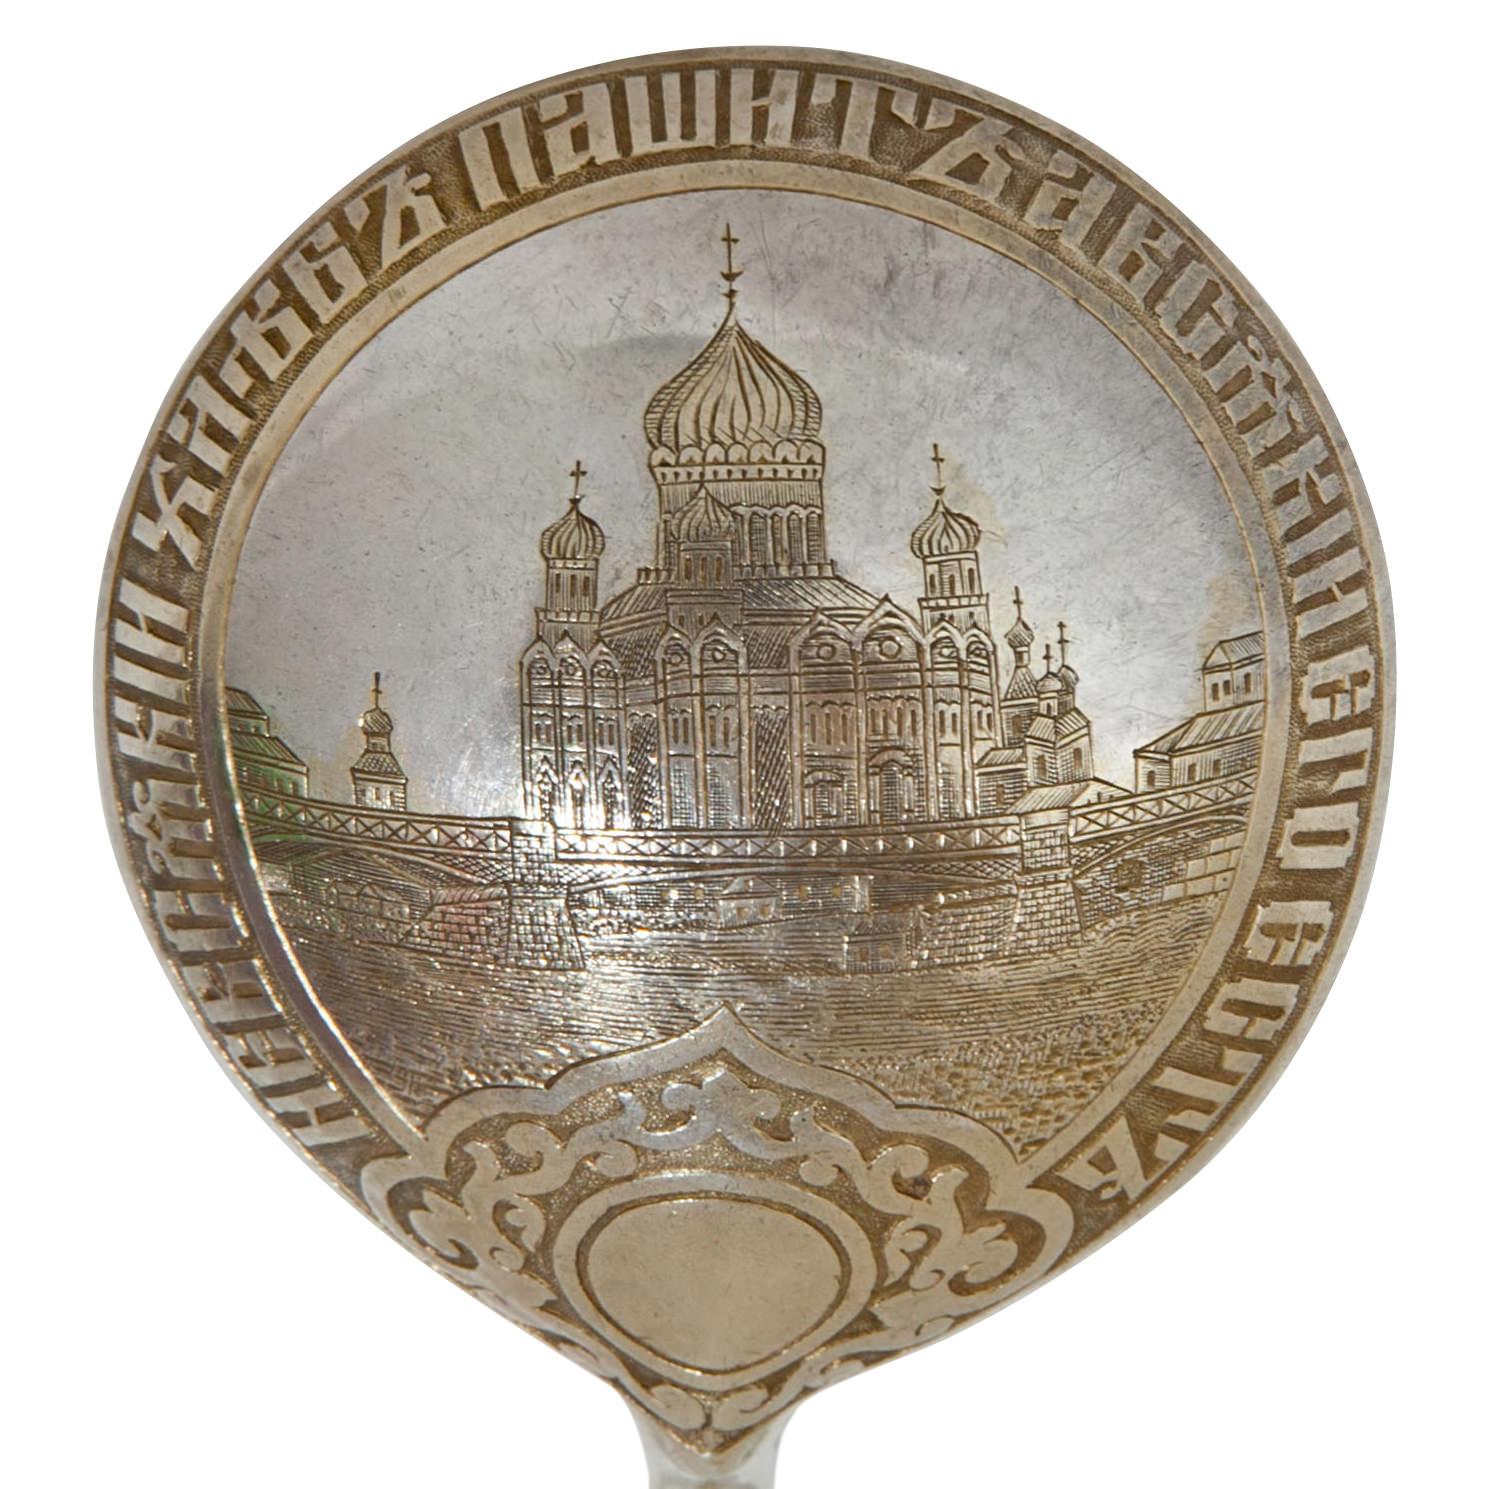 Large silver spoon (119g) with Russian inscription and depiction of the Cathedral of Christ the Savior in Moscow. Stamped at the neck, hallmark not identifiable (623: 1875-1880) makers mark AK for Antip Iwanowitsch Kusmitschew.